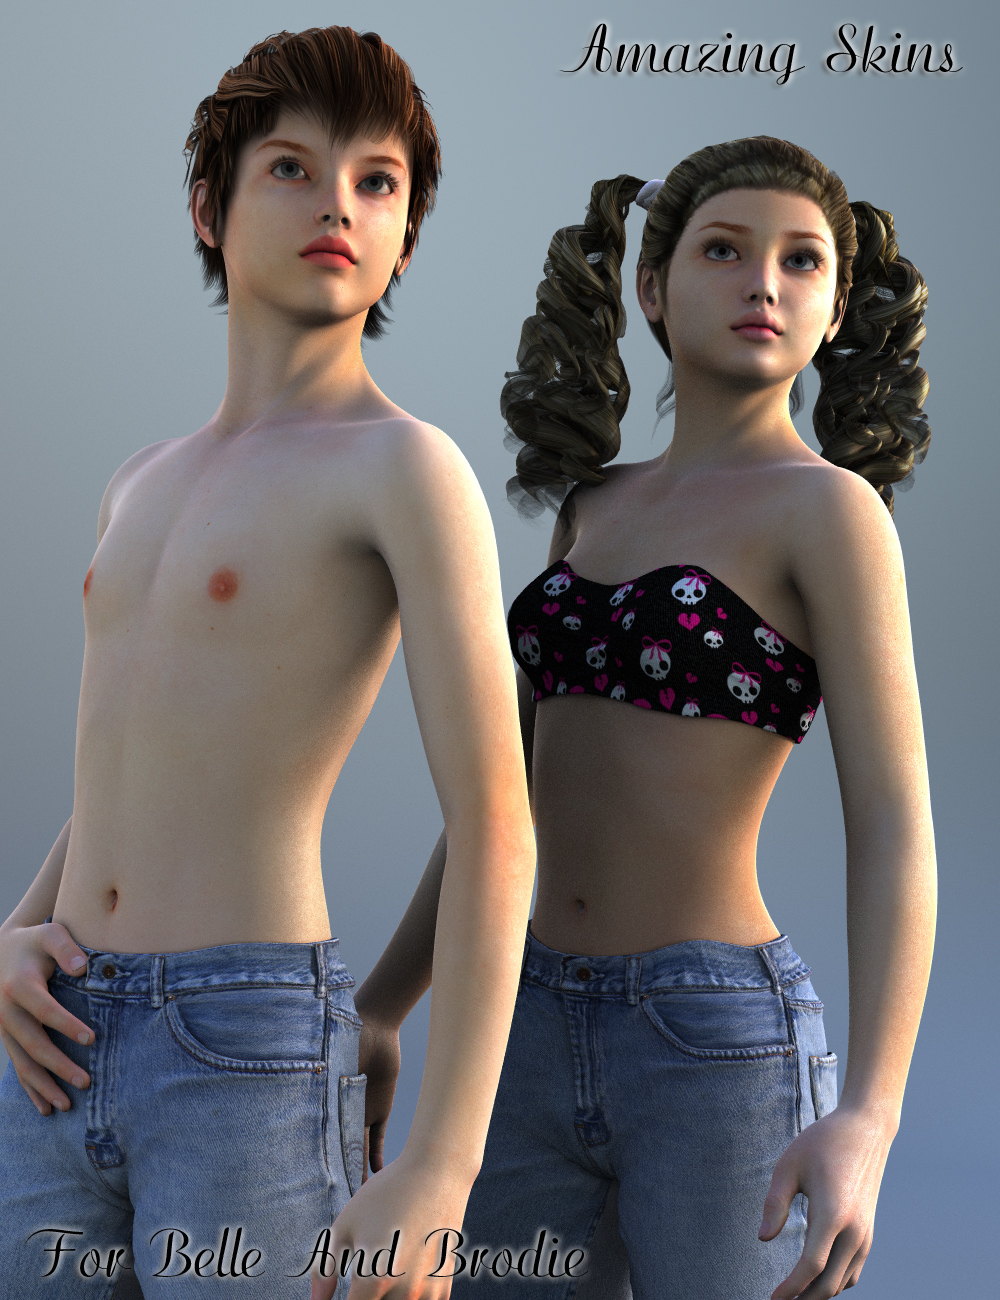 Amazing Skins for Belle 6 And Brodie 6 Bundle_DAZ3D下载站